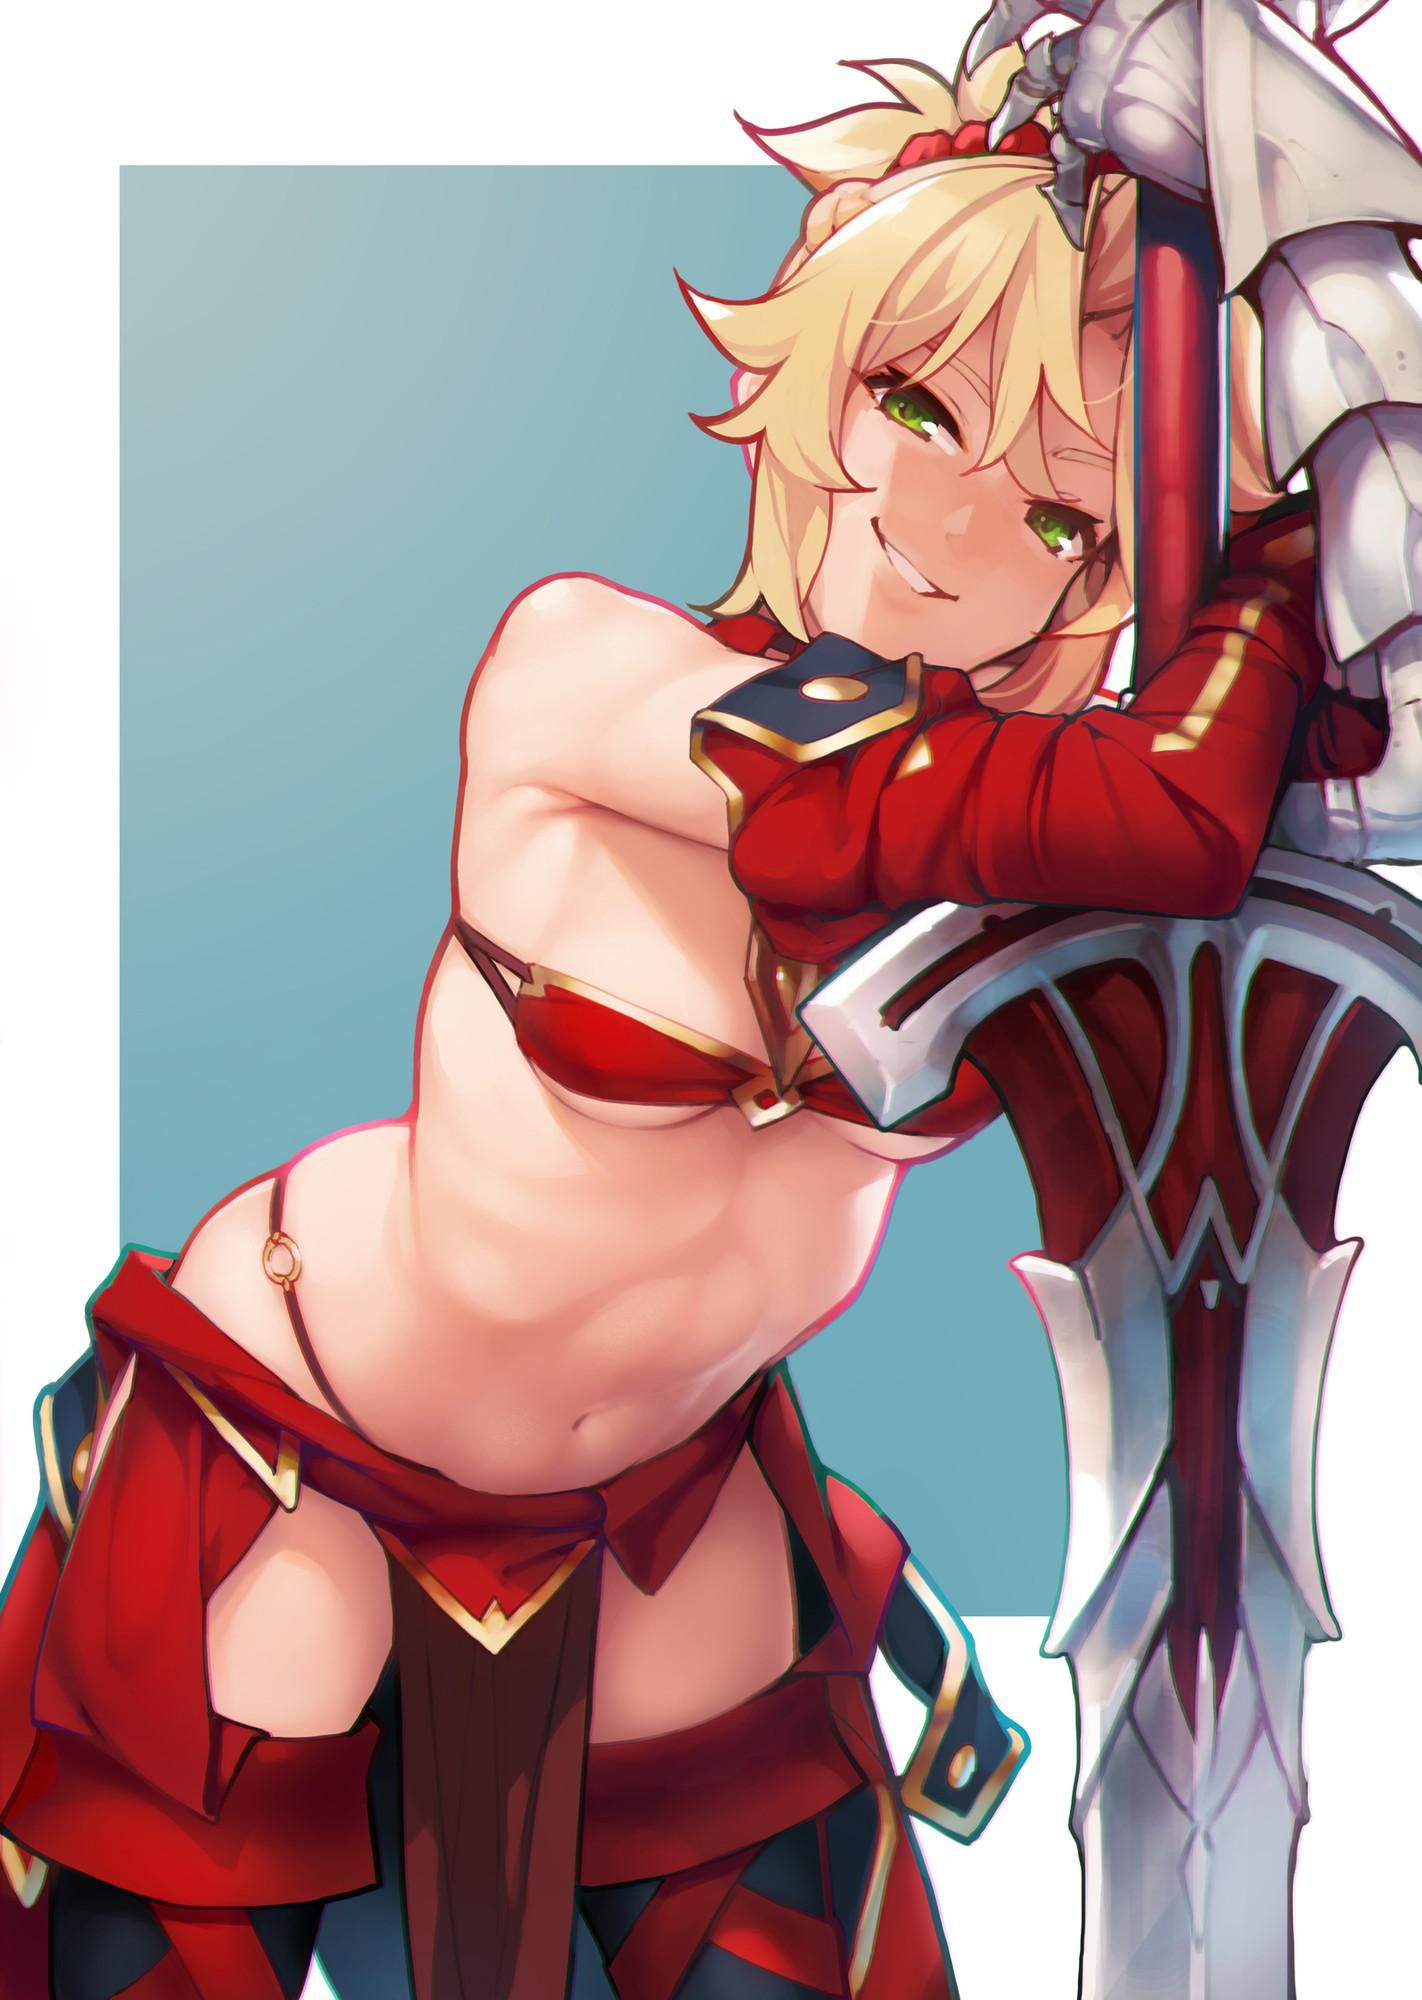 [Fate/GrandOrder] Mode Red's Erotic &amp; Moe Images [Fate/Apocrypha] 23